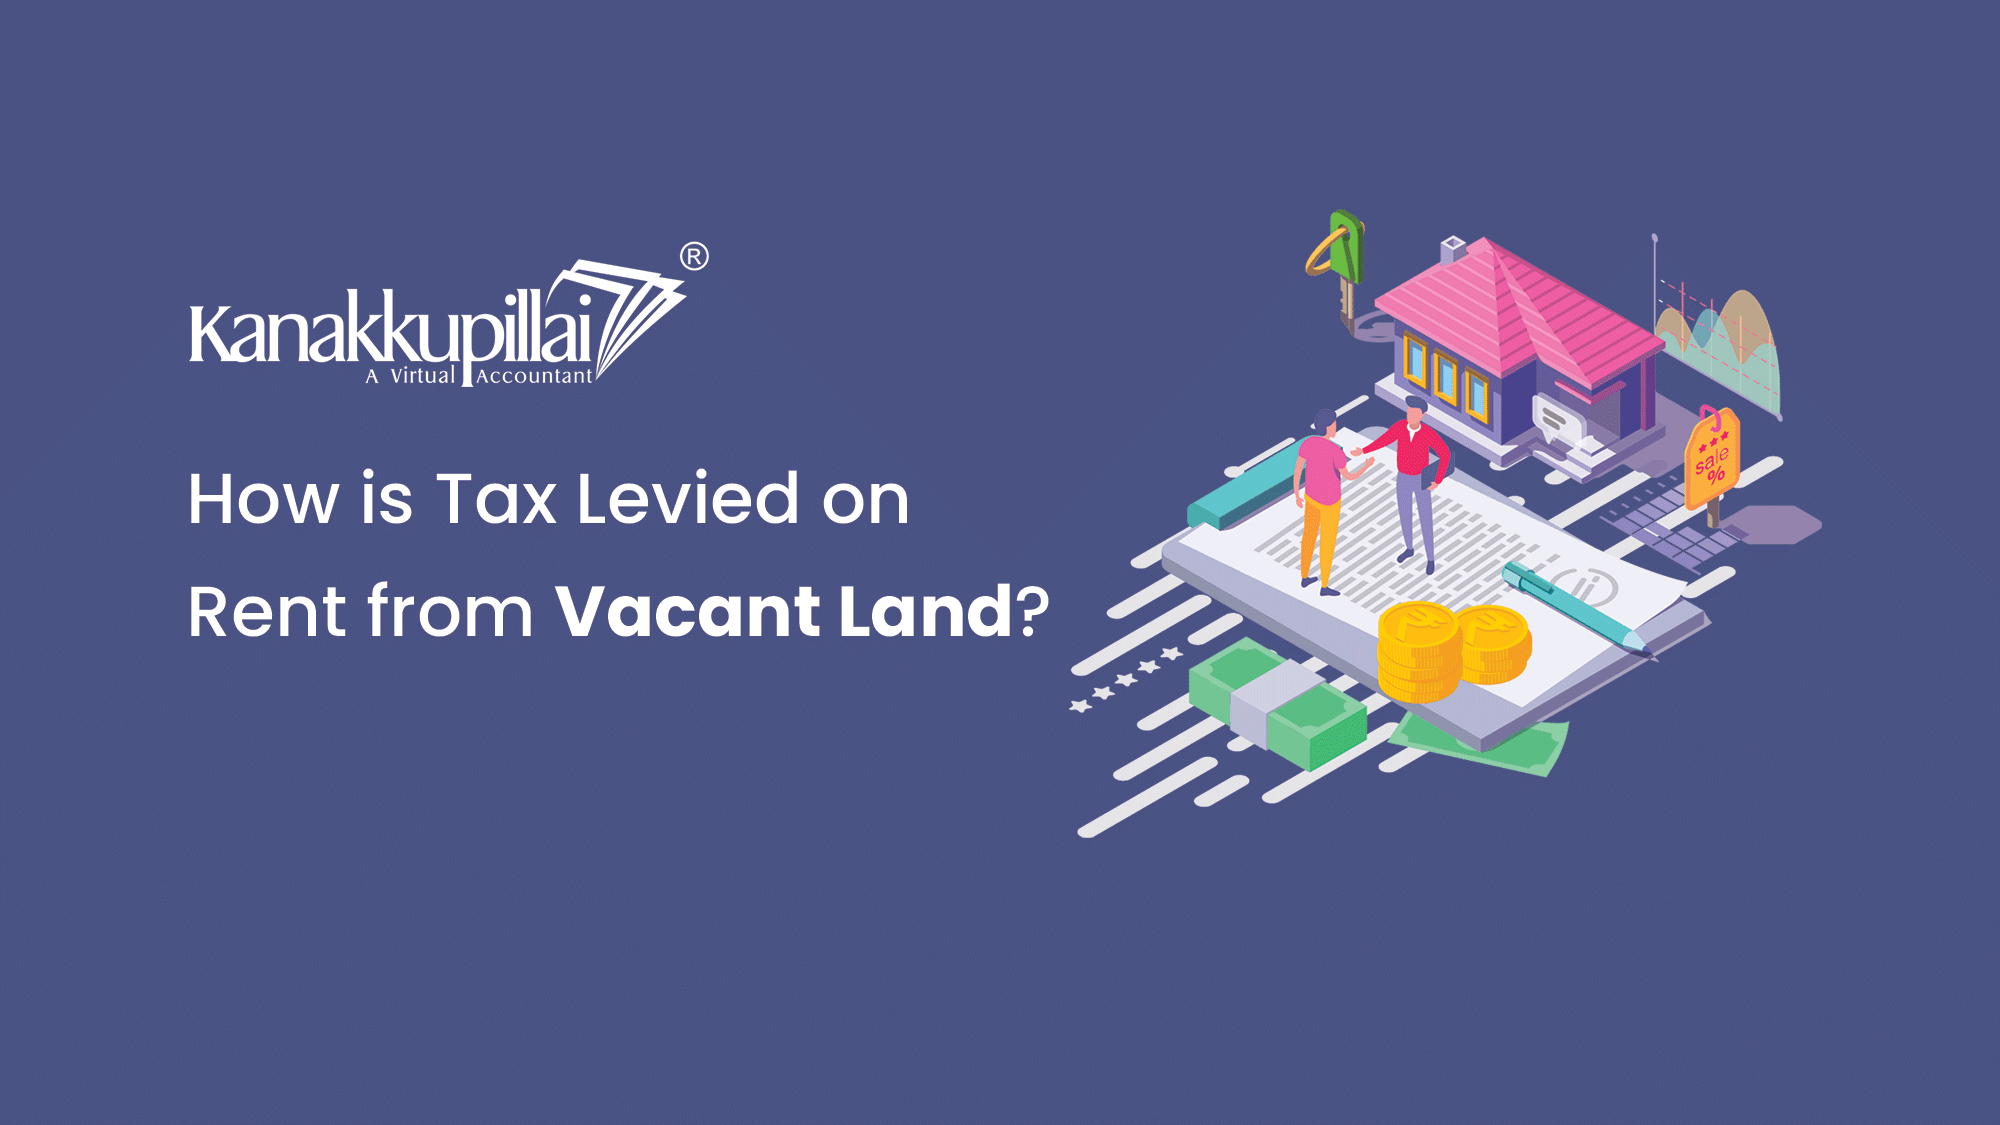 How is Tax Levied on Rent from Vacant Land?